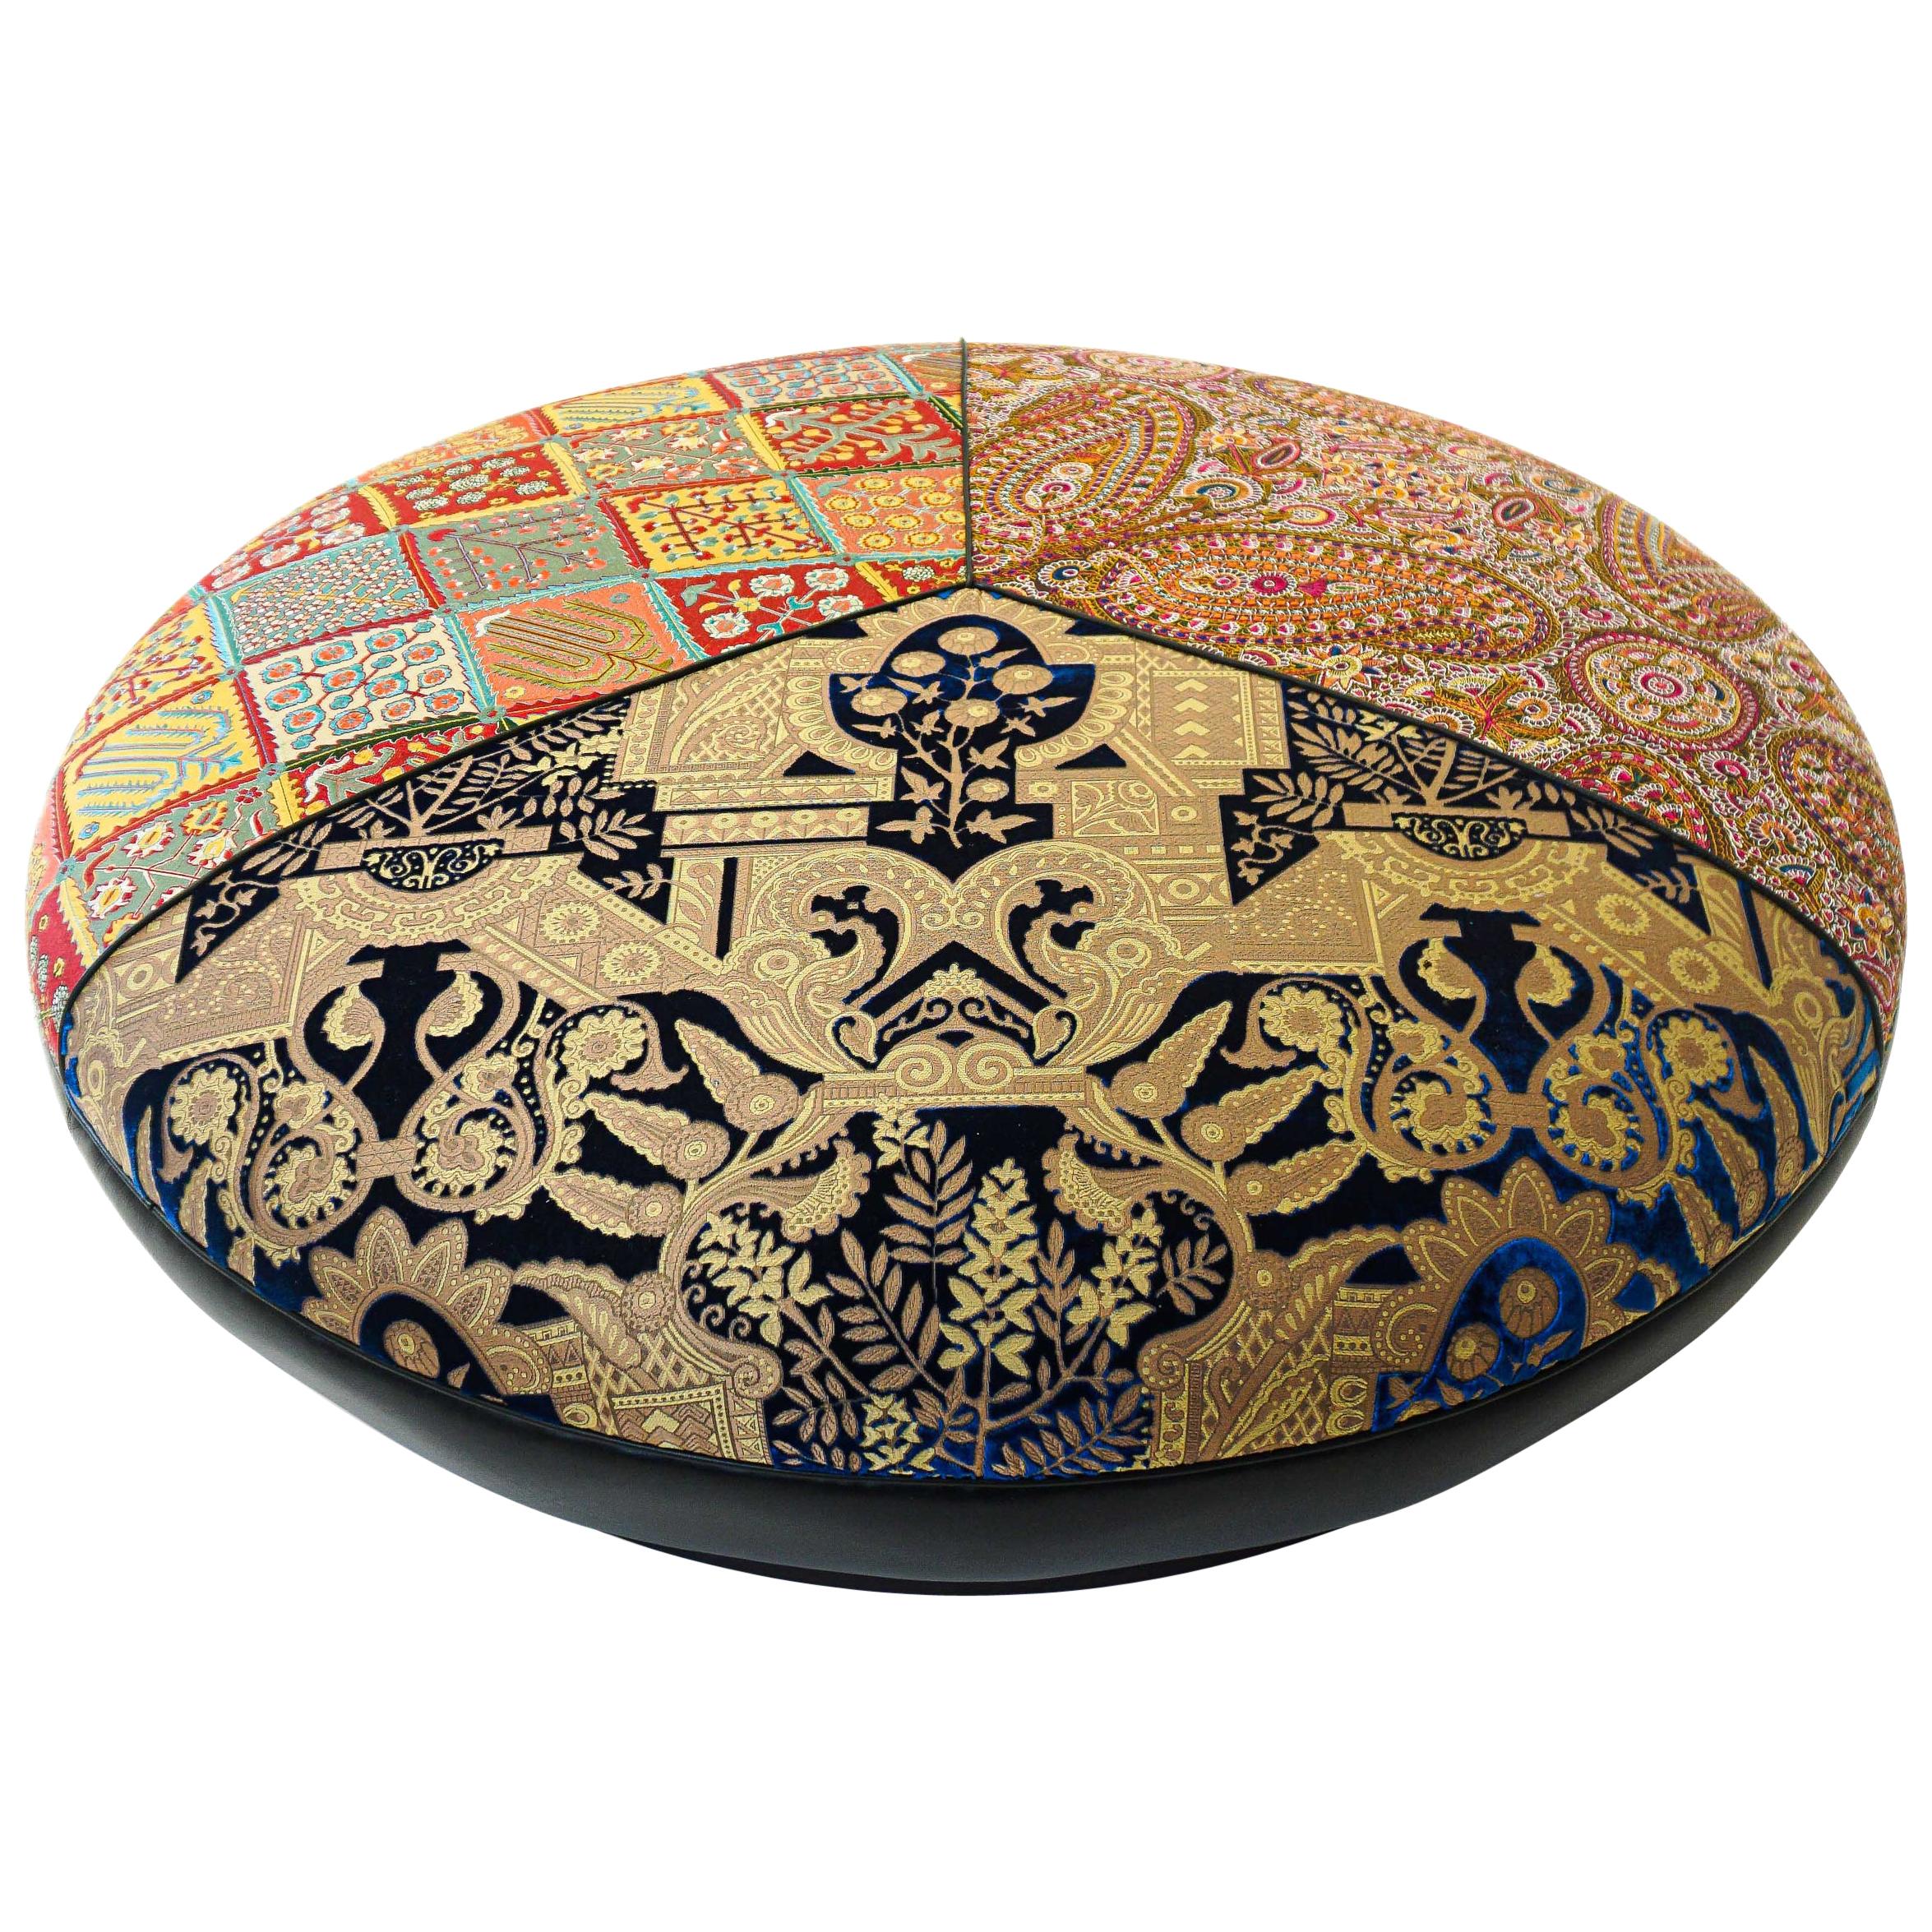 Large Round Upholstered Moroccan-Inspired Ottoman, Customizable For Sale